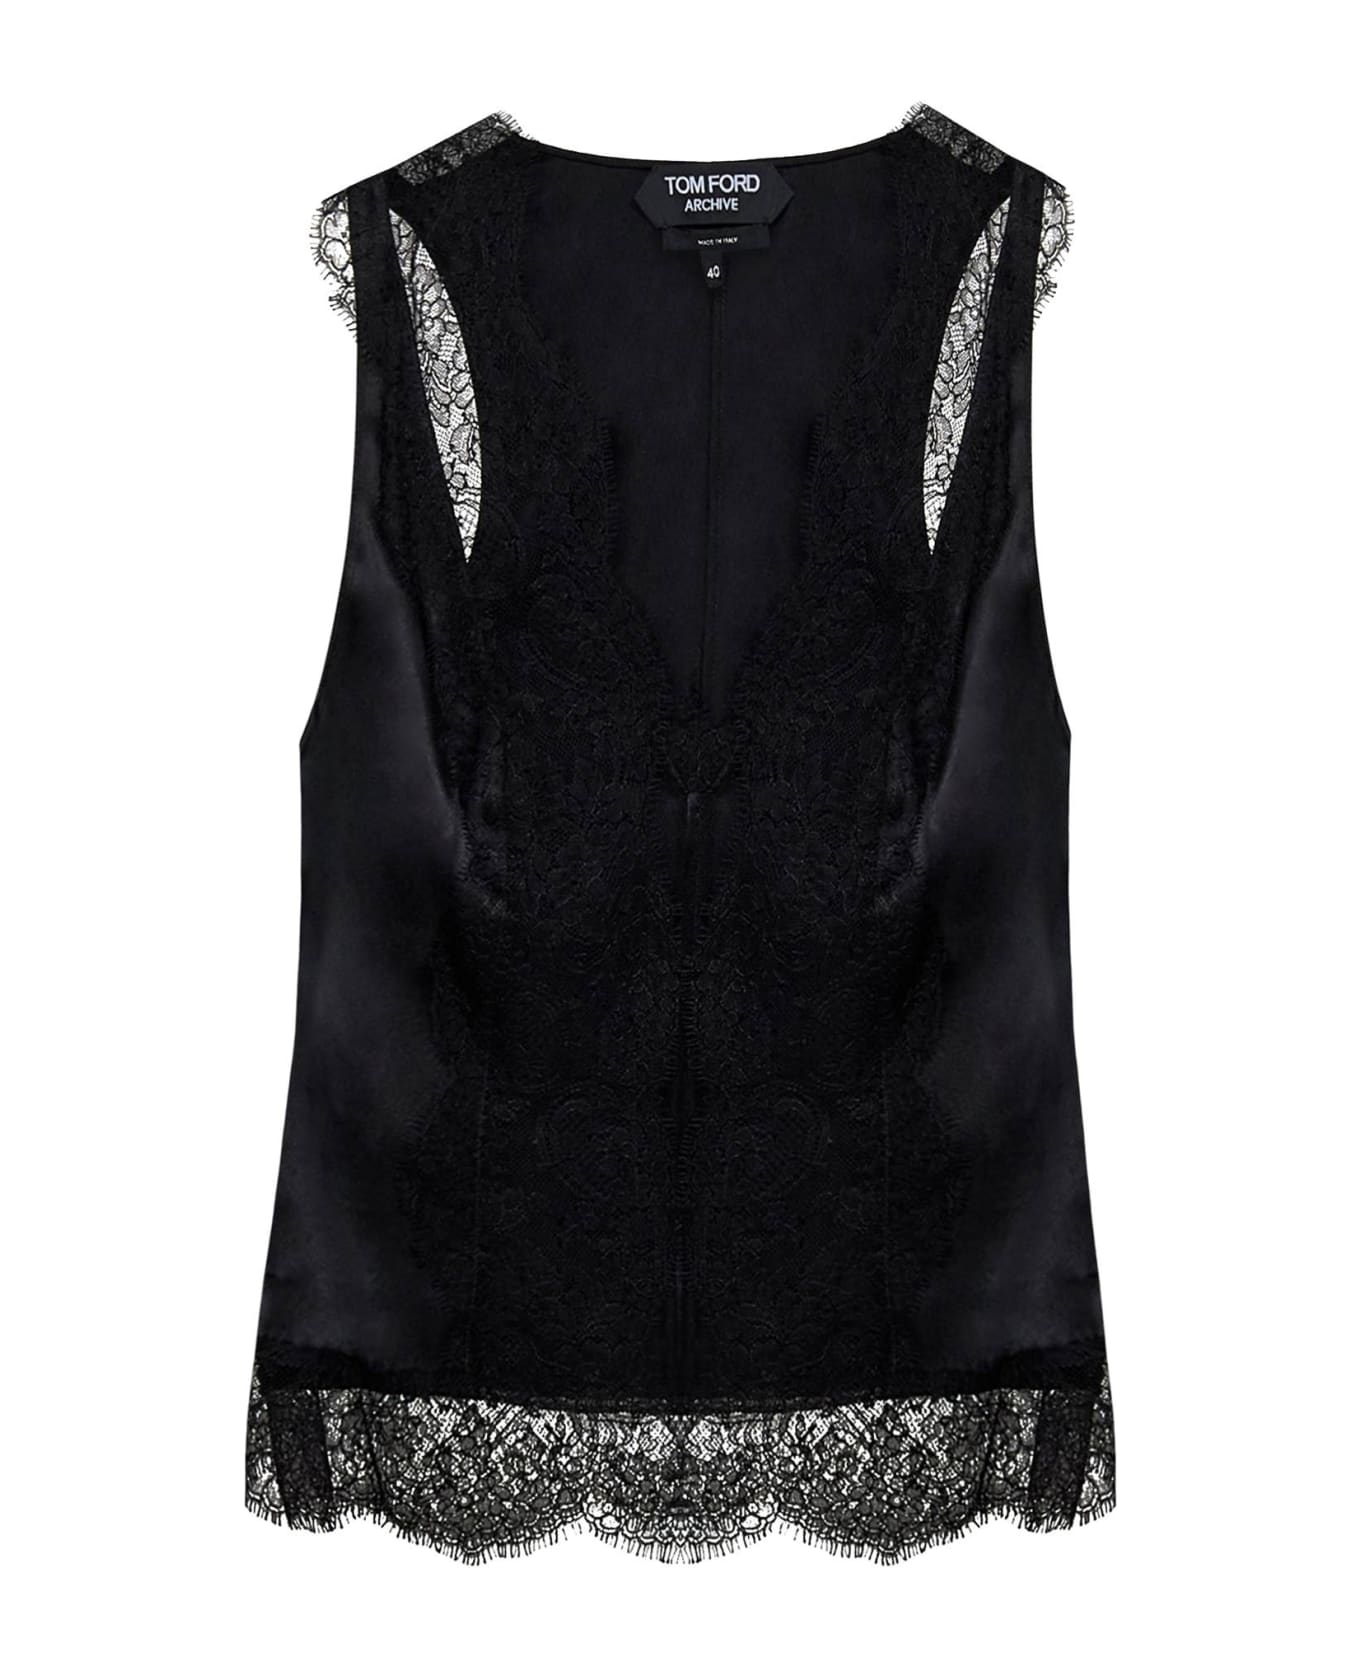 Tom Ford Satin Tank Top With Chantilly Lace - BLACK (Black)